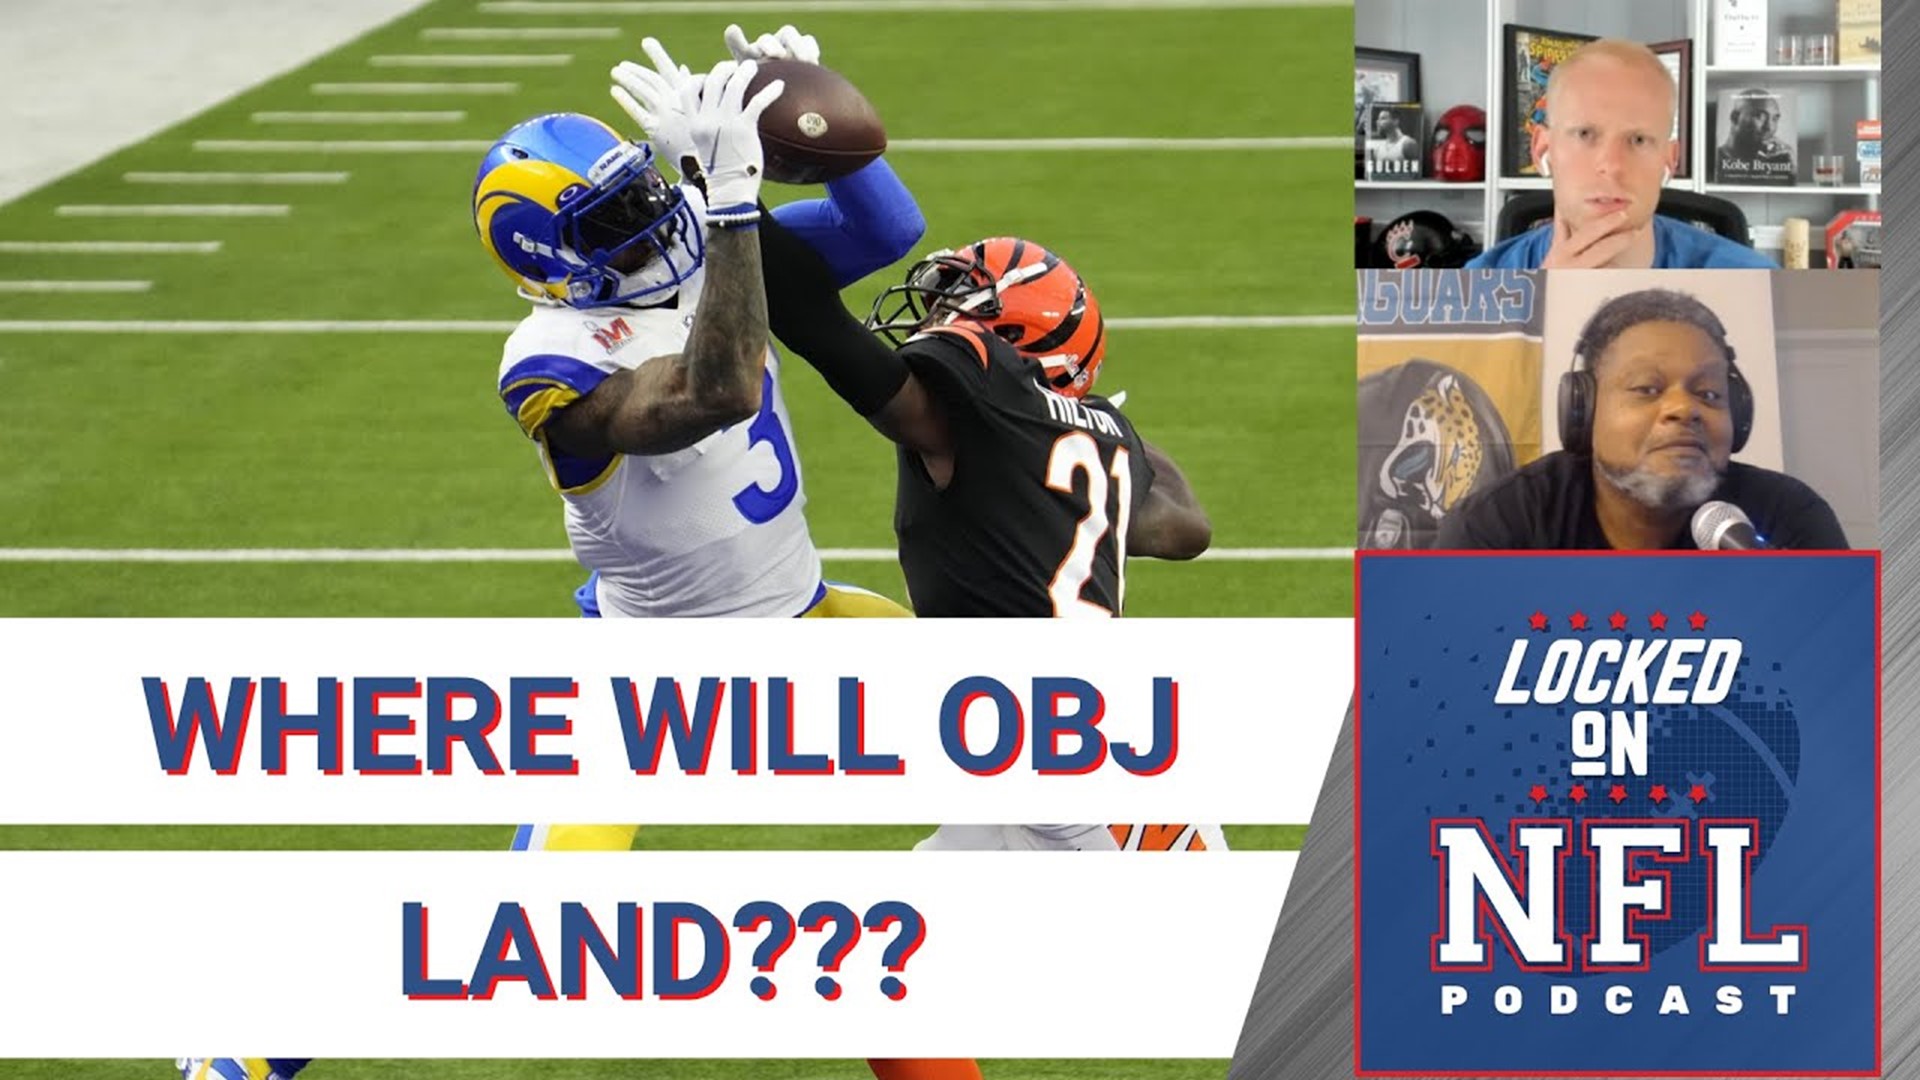 Where Will Odell Beckham Jr. Land and Could Jameis Winston Lead Saints to Postseason?